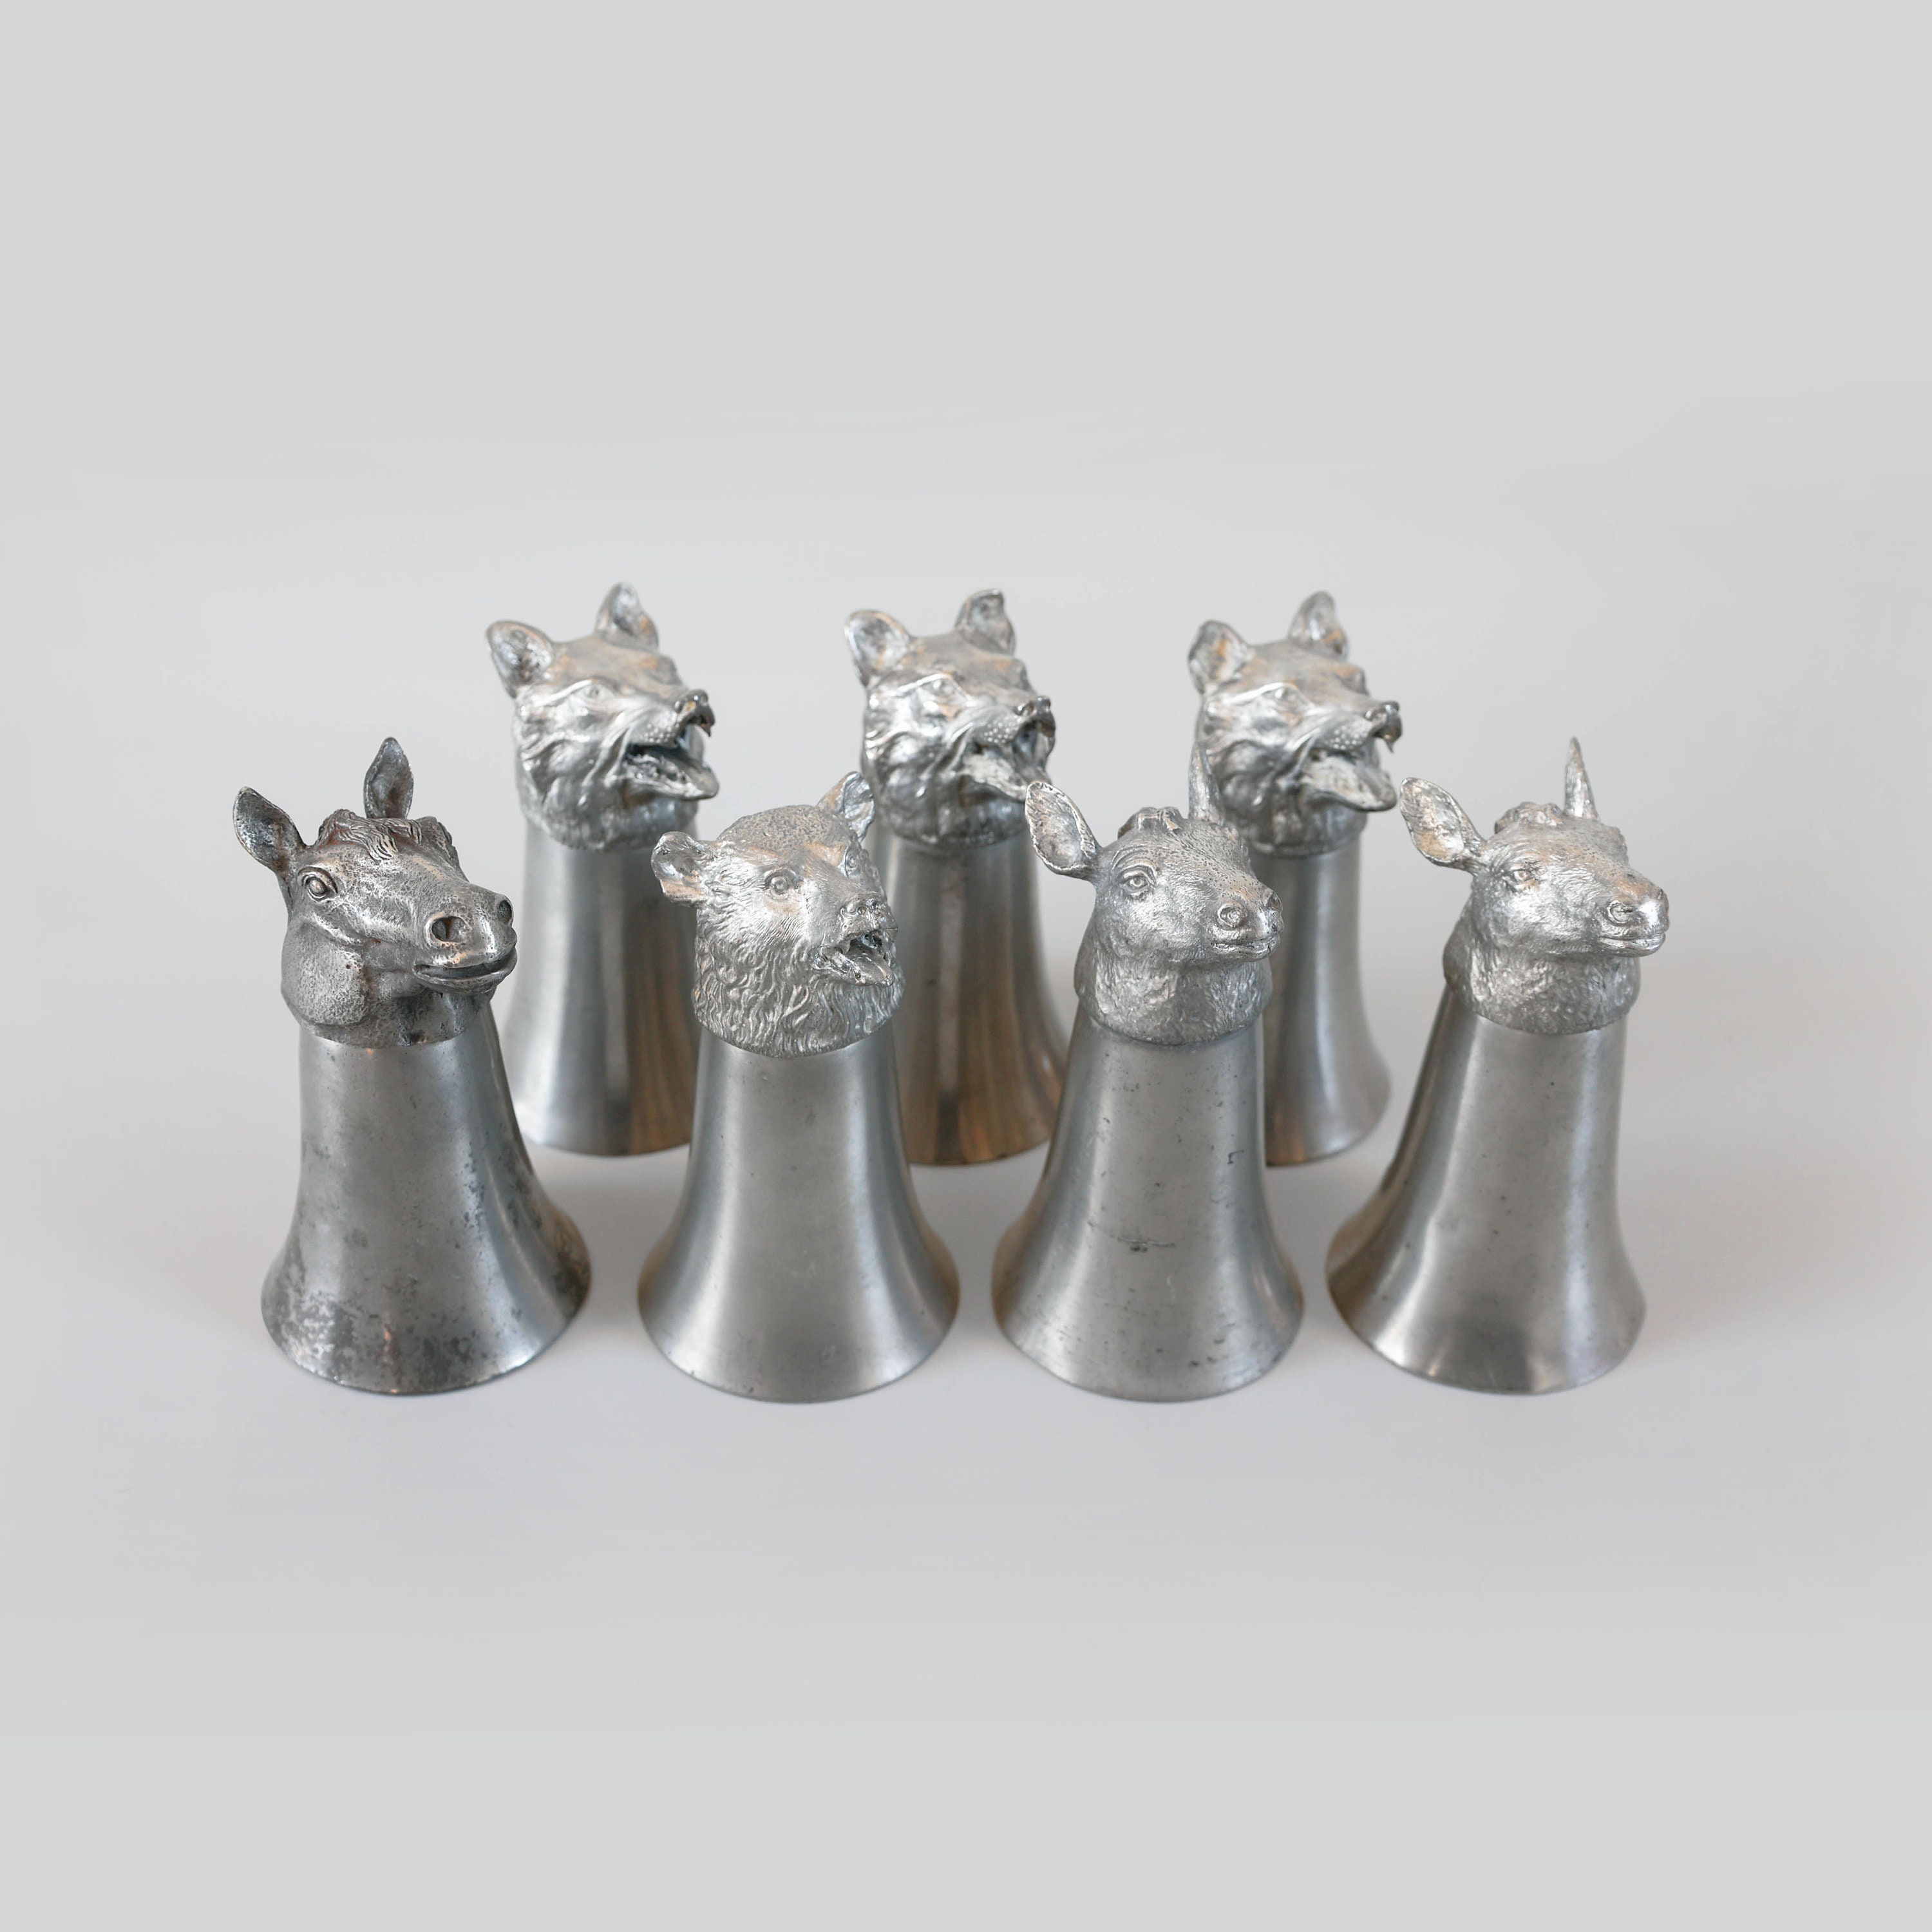 1980s Gucci Stag Silver-Plated Large Stirrup Cup Goblets - 4 Pieces